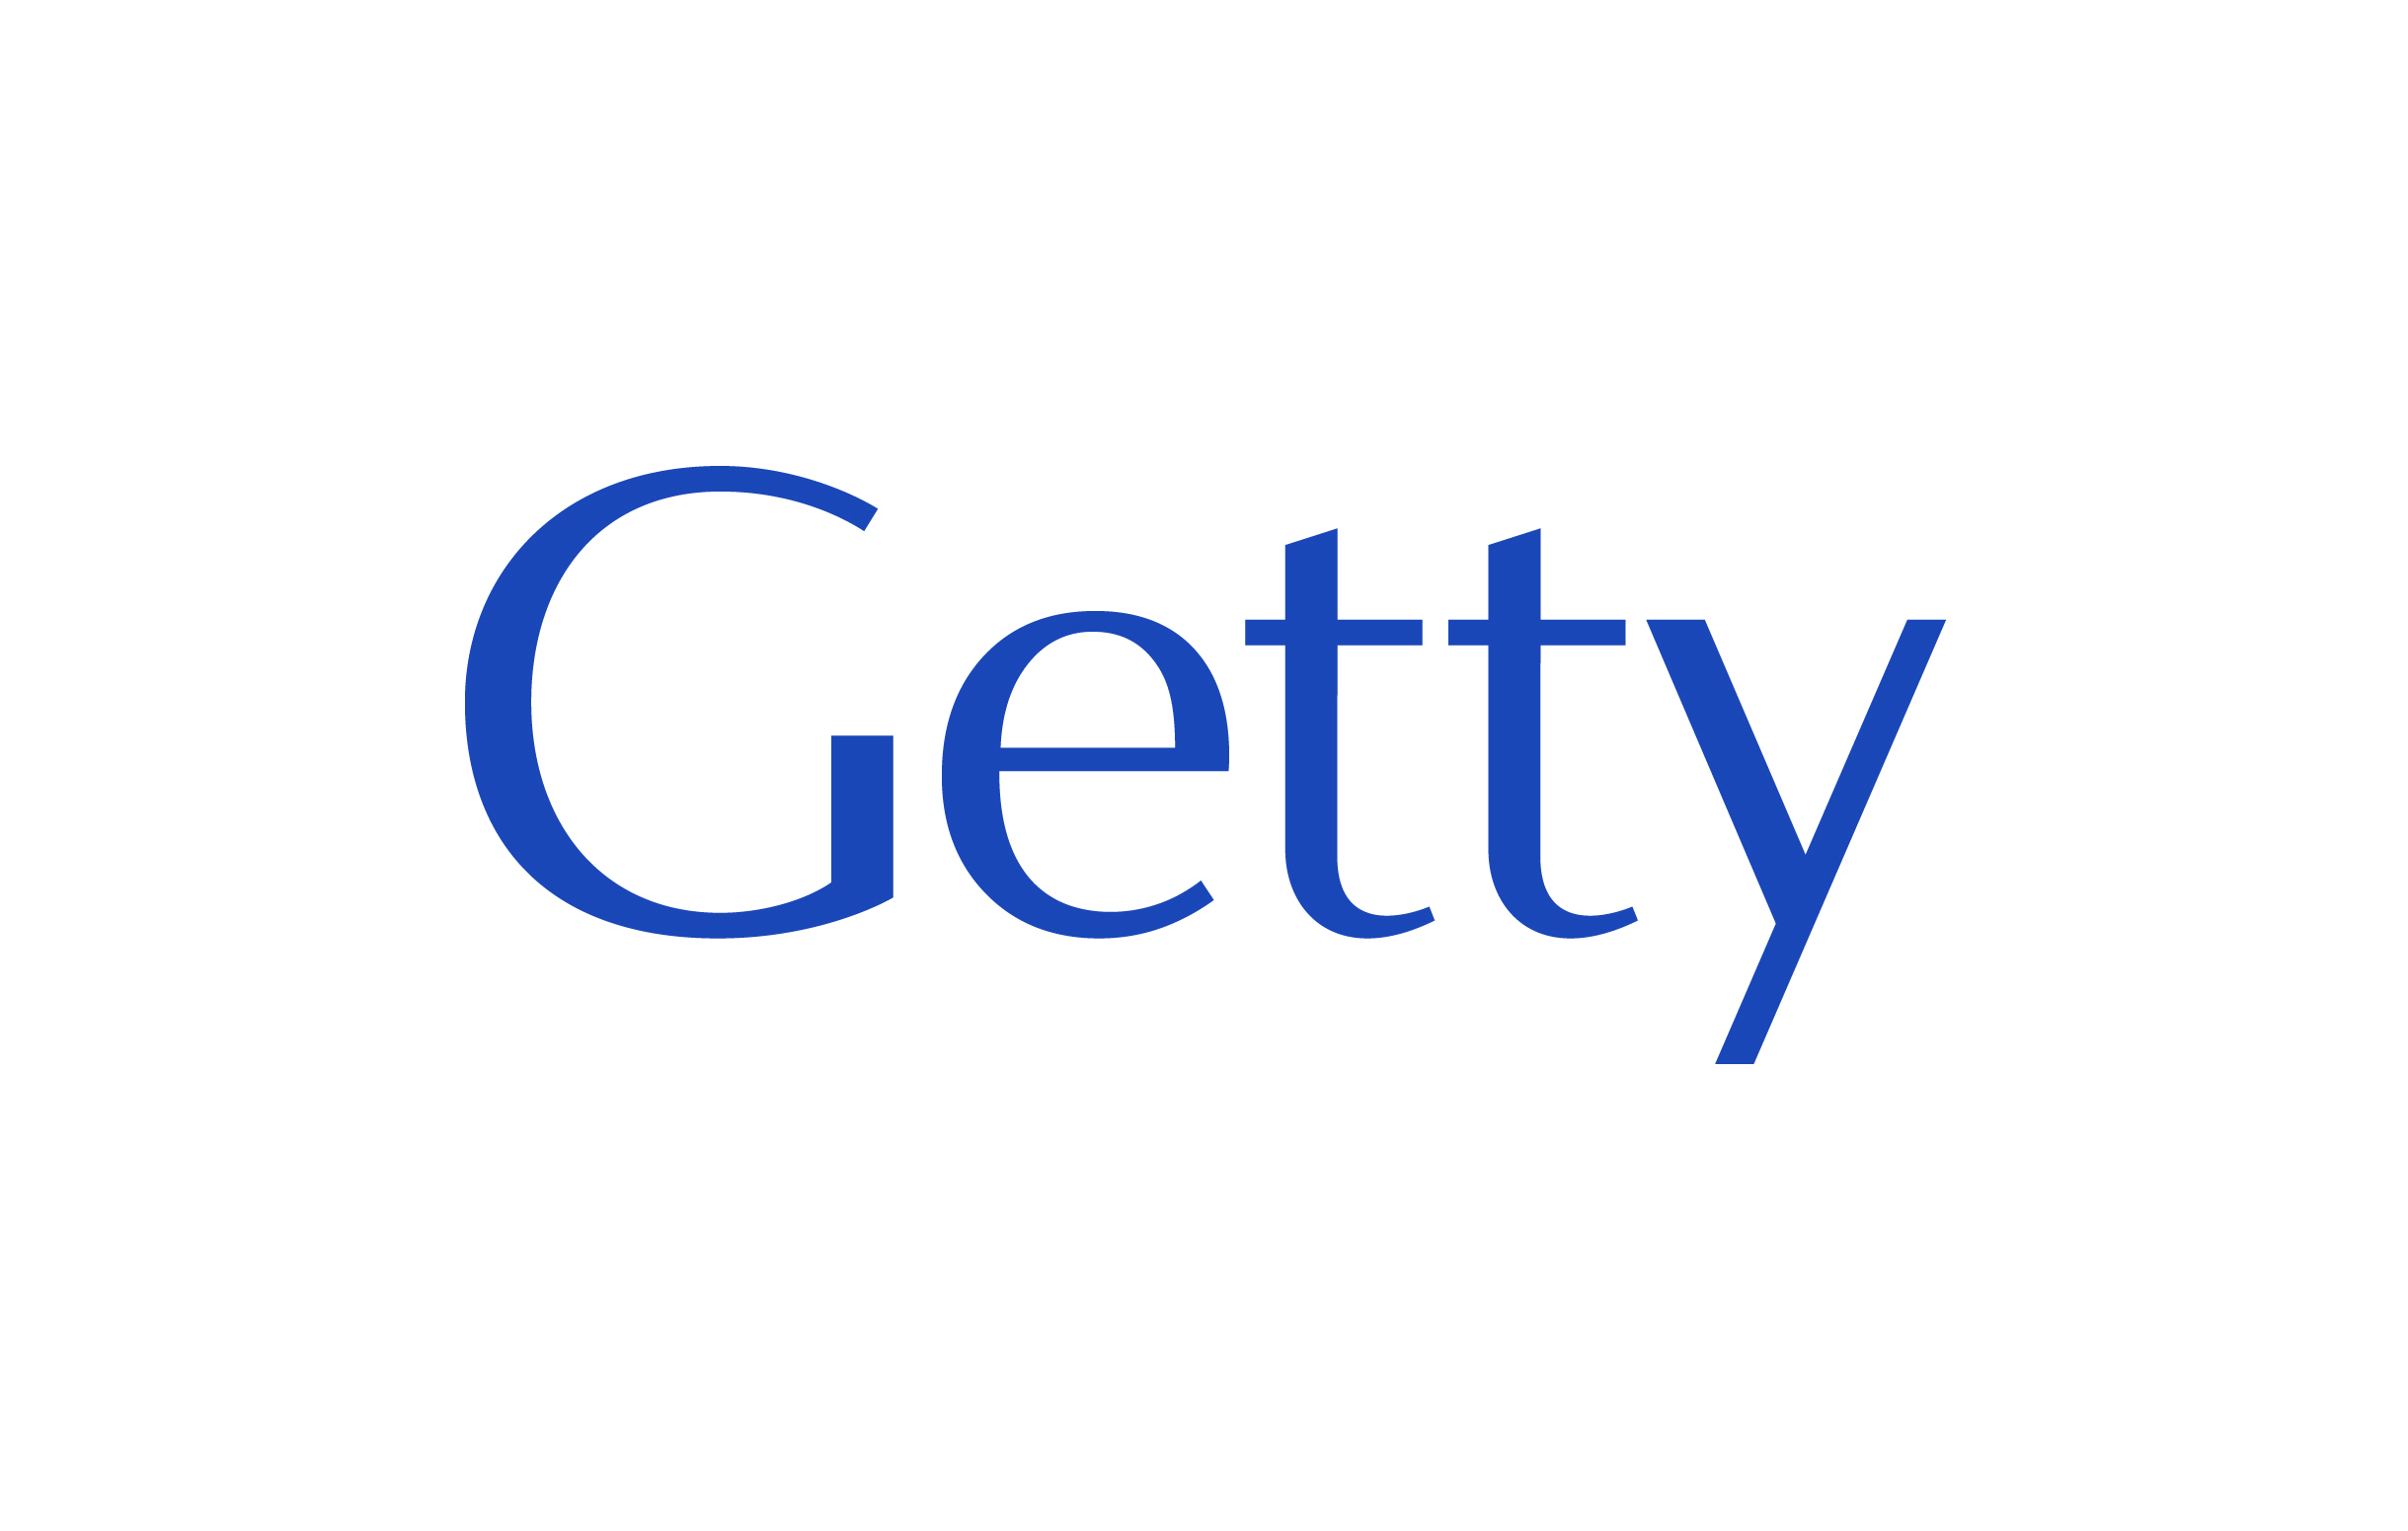 "Getty" in blue font on a white background